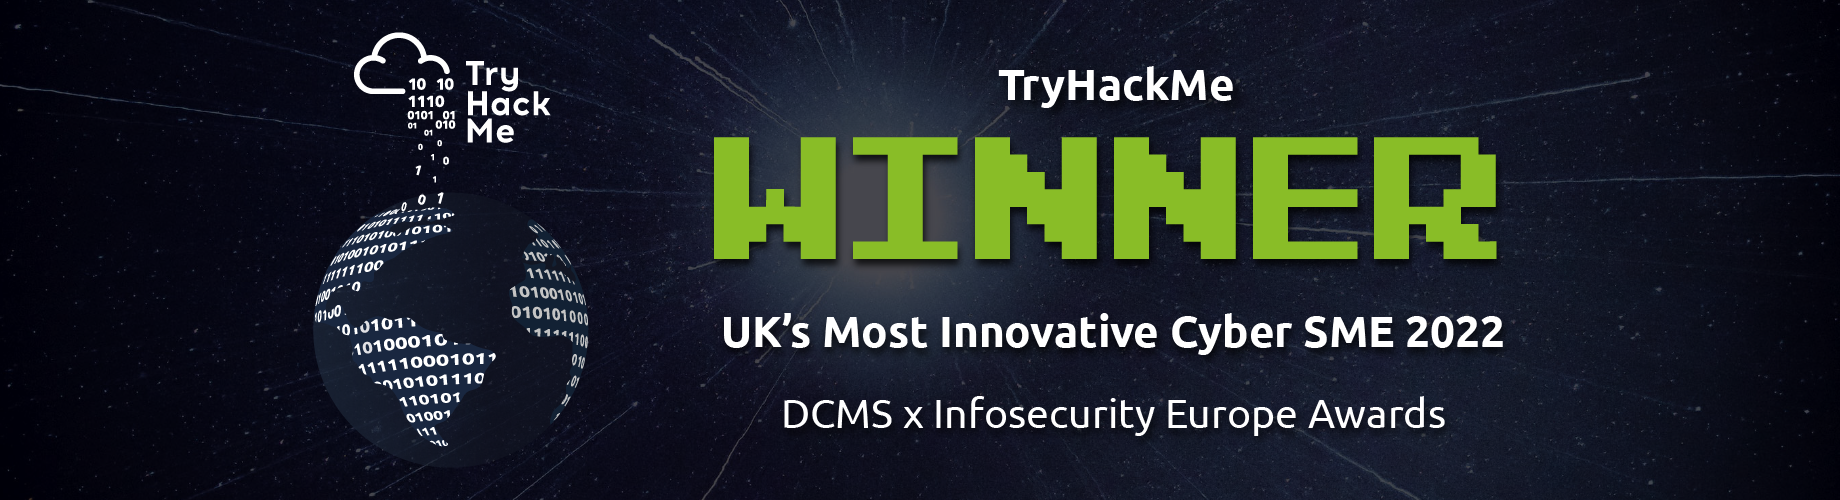 TryHackMe Awarded the UK’s Most Innovative Cyber SME at Infosecurity Europe 2022